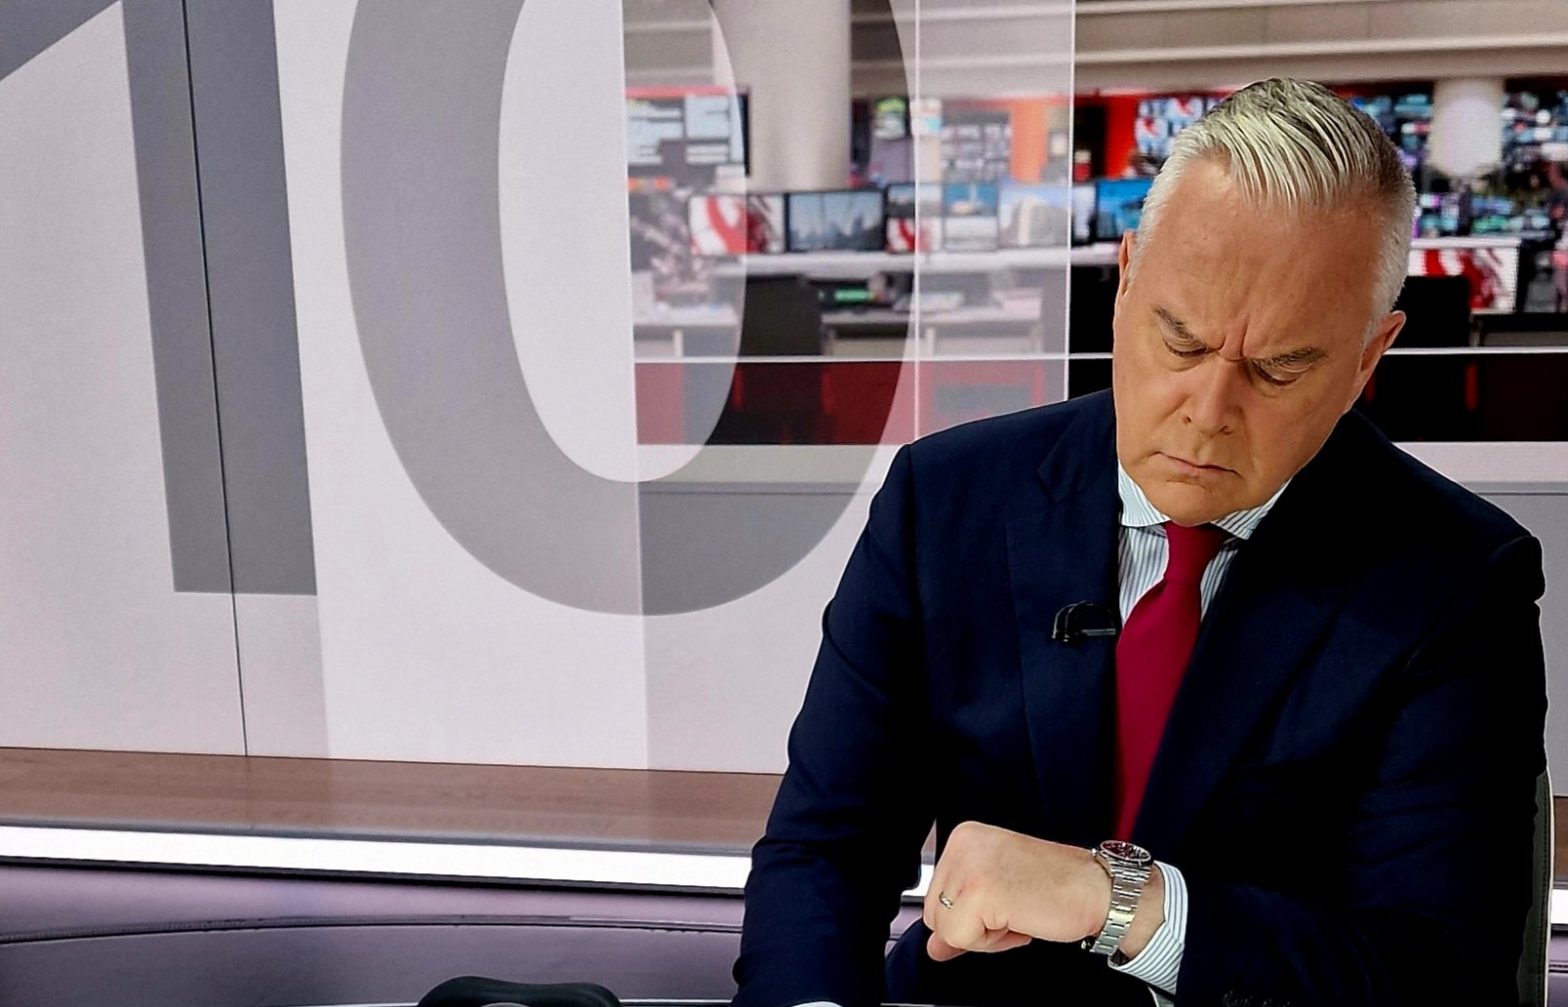 Huw Edwards named in ‘teen explicit photo’ scandal, social media users react